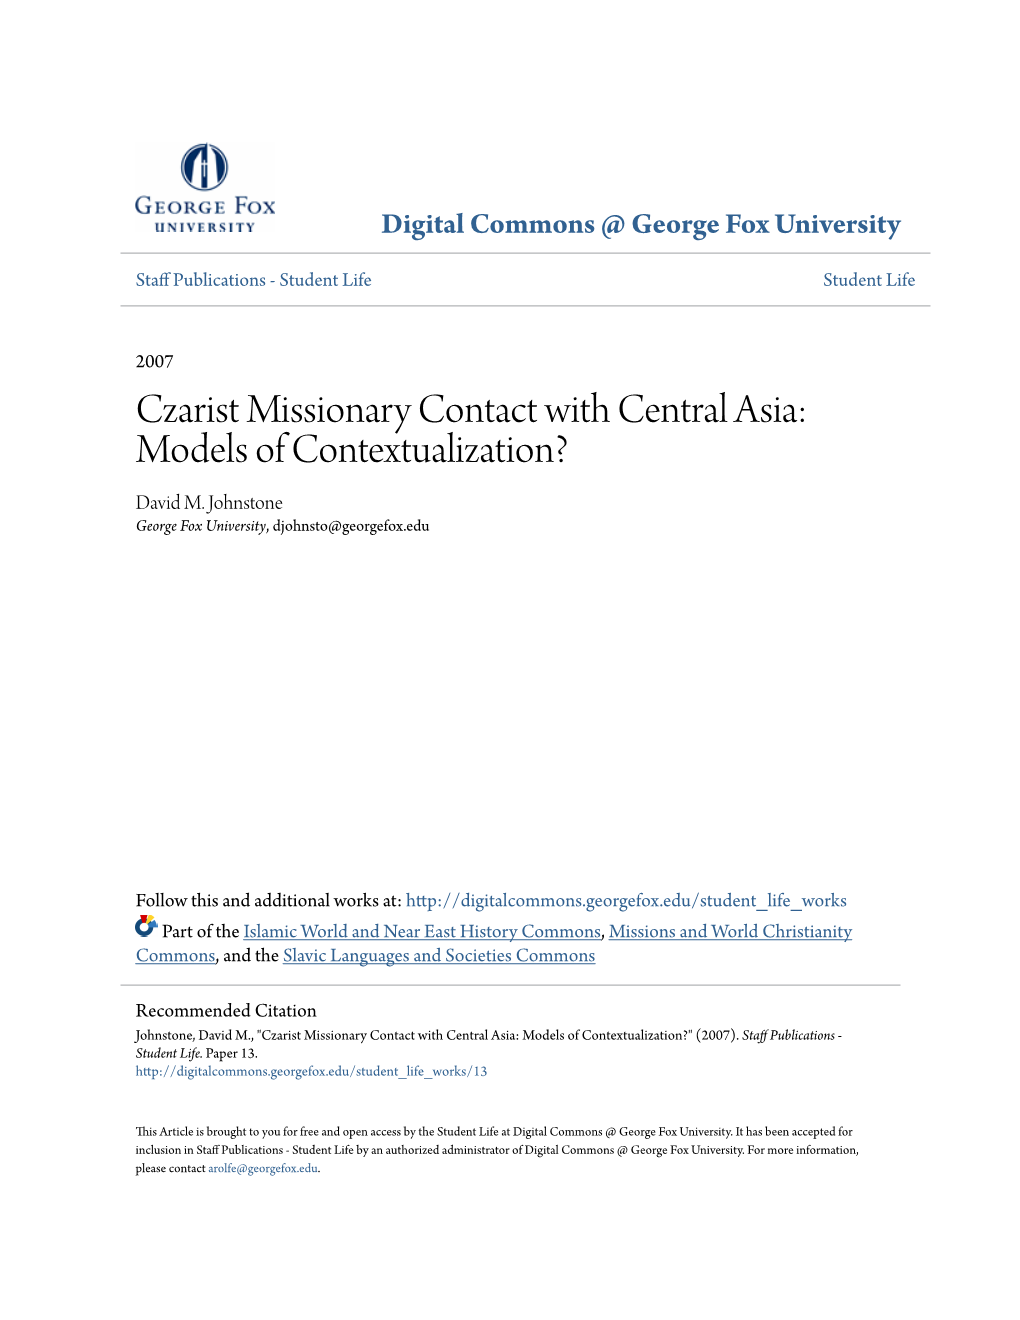 Czarist Missionary Contact with Central Asia: Models of Contextualization? David M